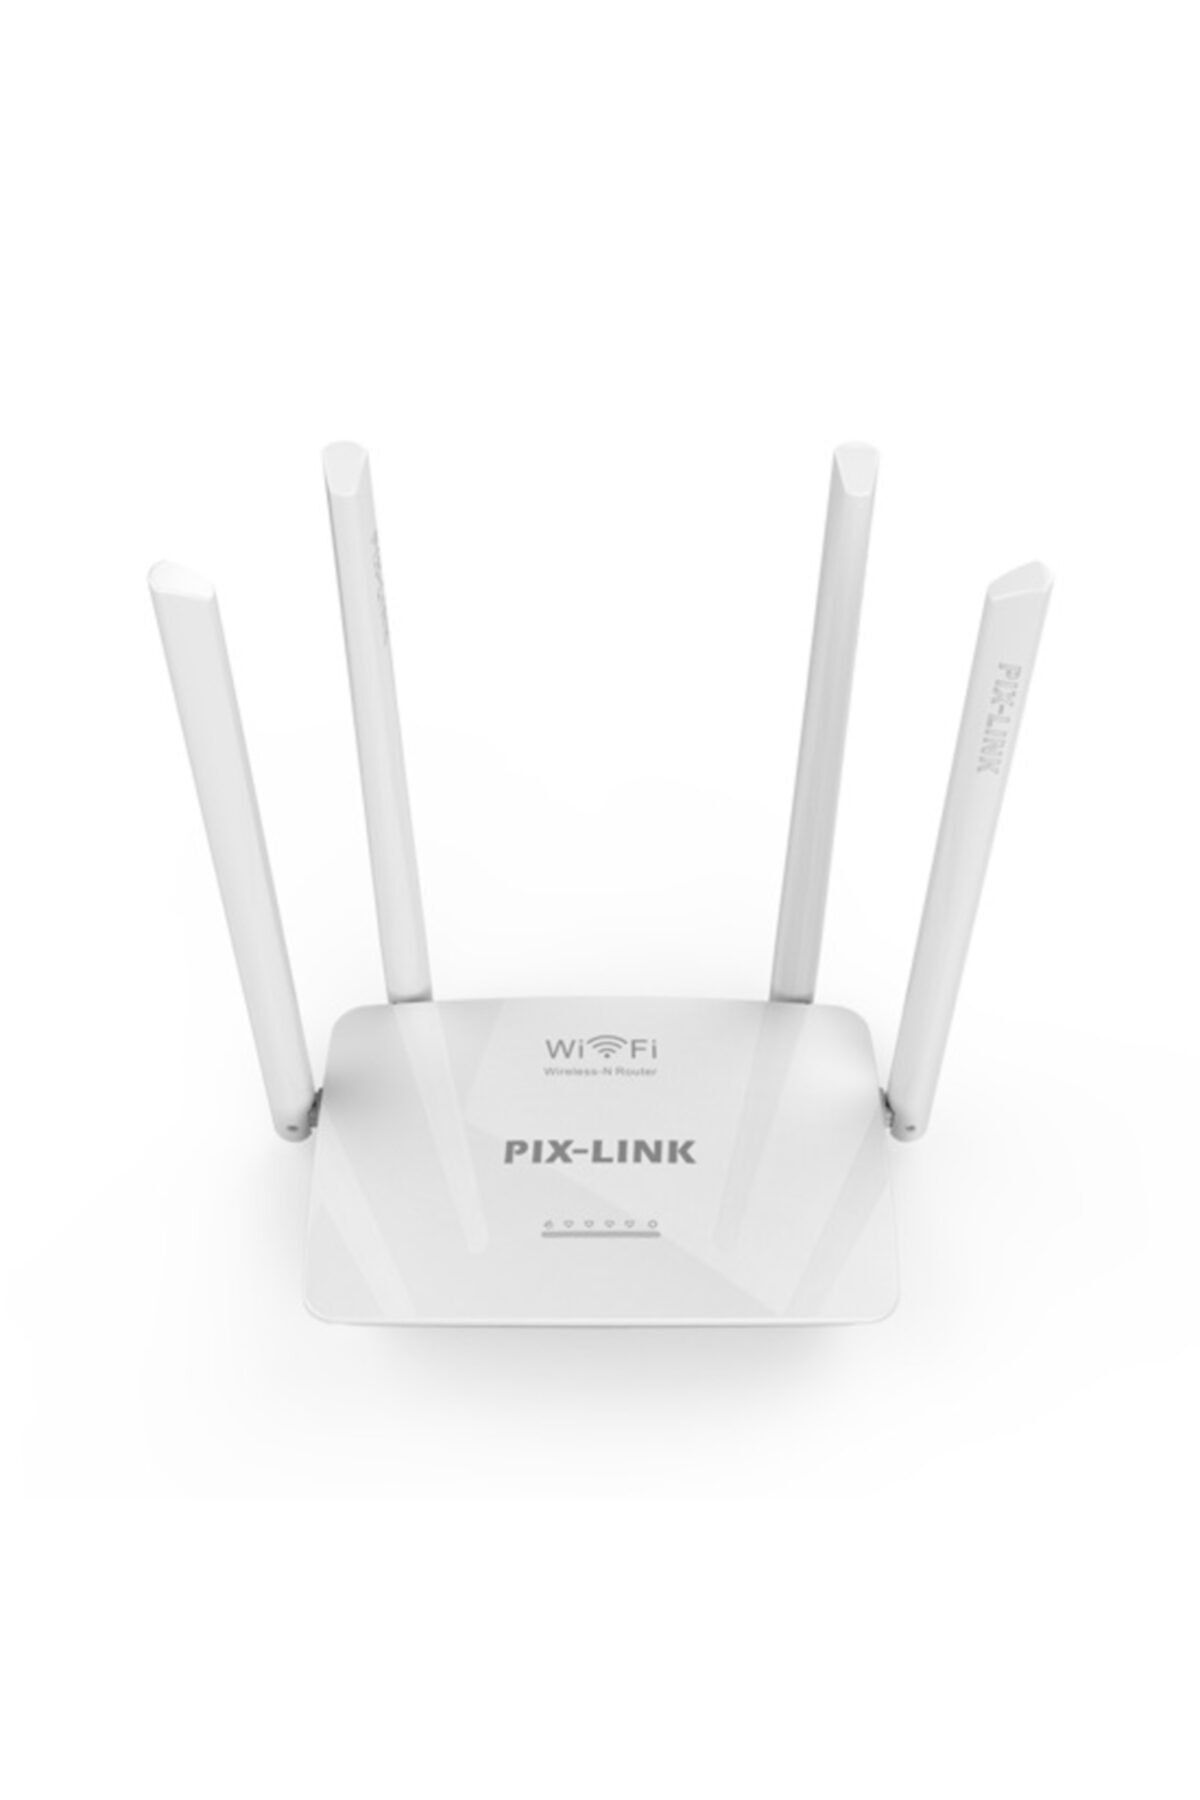 wellbox Lv-wr08 300mbps Wireless-n Router